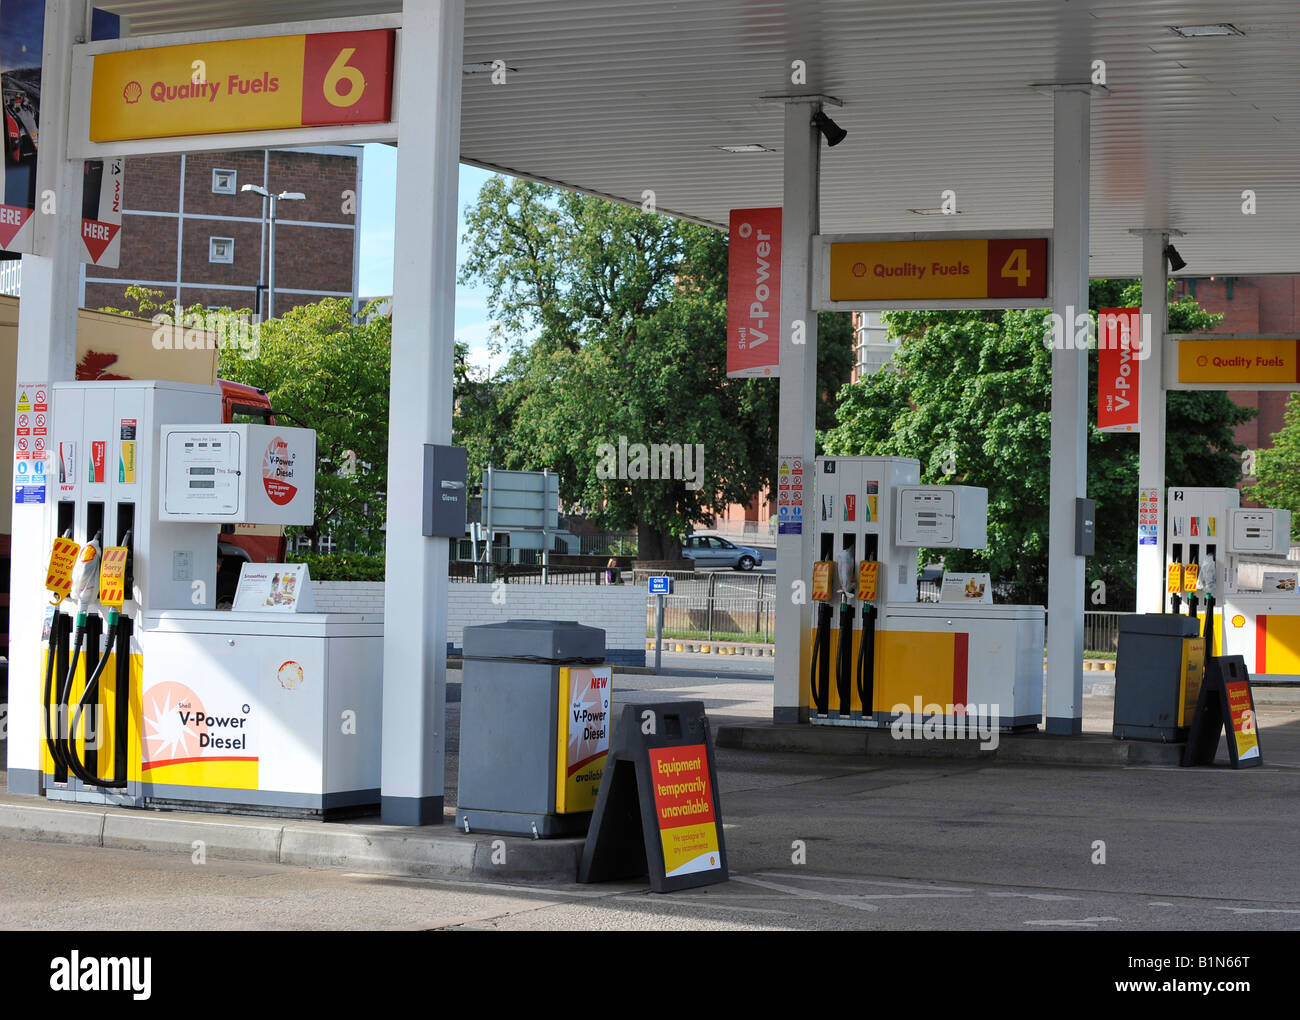 Unleaded petrol and diesel fuel pumps out of use unavailable at a Shell filling station Stock Photo